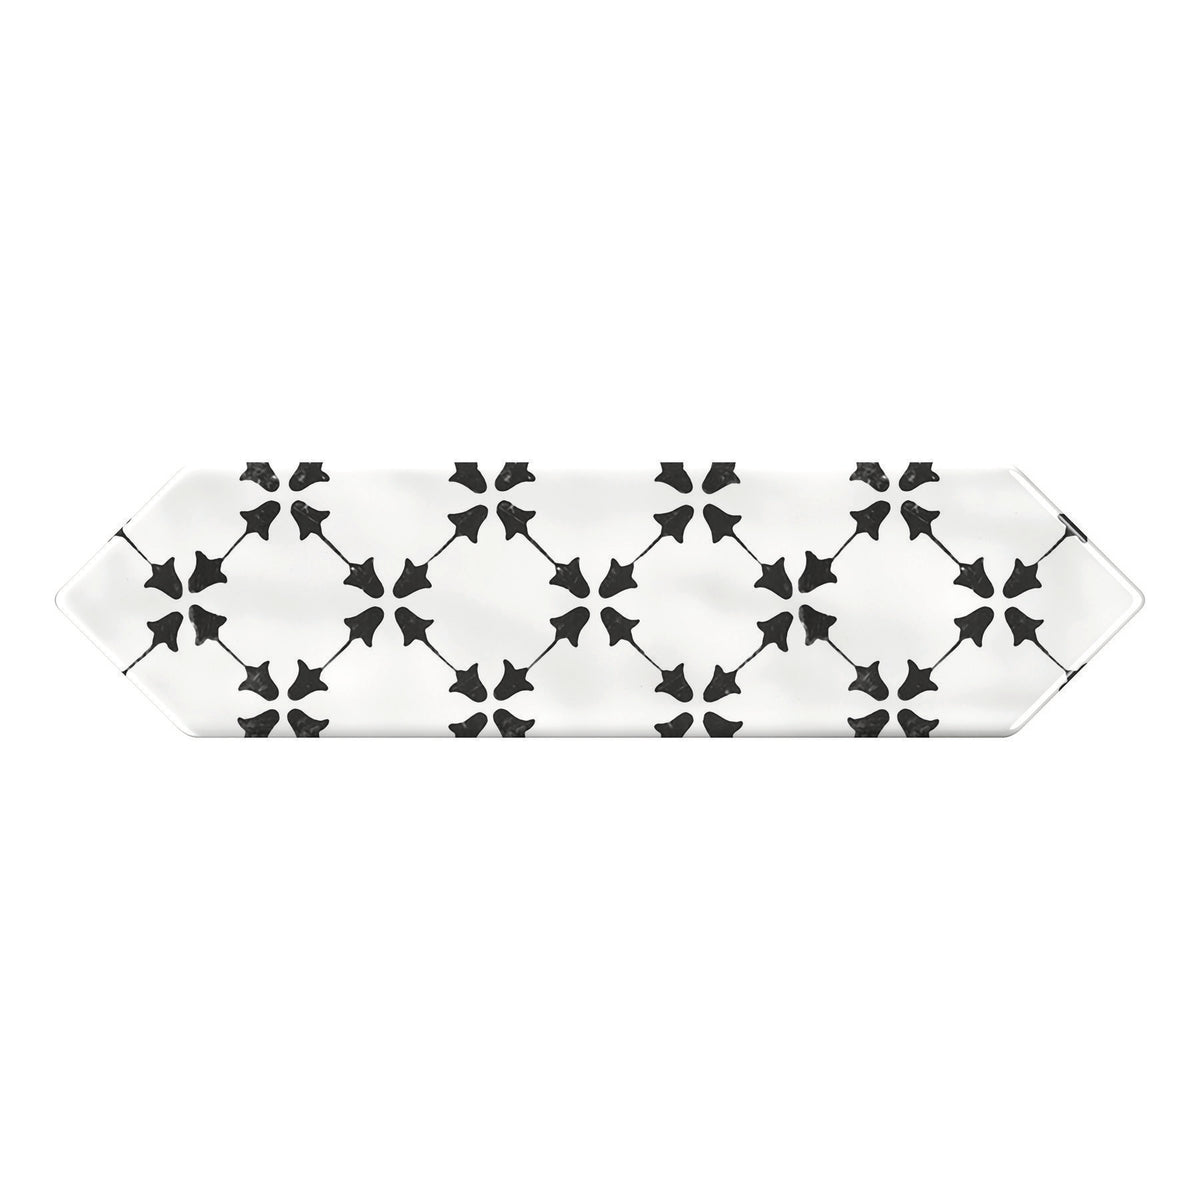 Daltile - Stagecraft - 3 in. x 12 in. Picket Deco Wall Tile - Ensemble Black Mix SC70